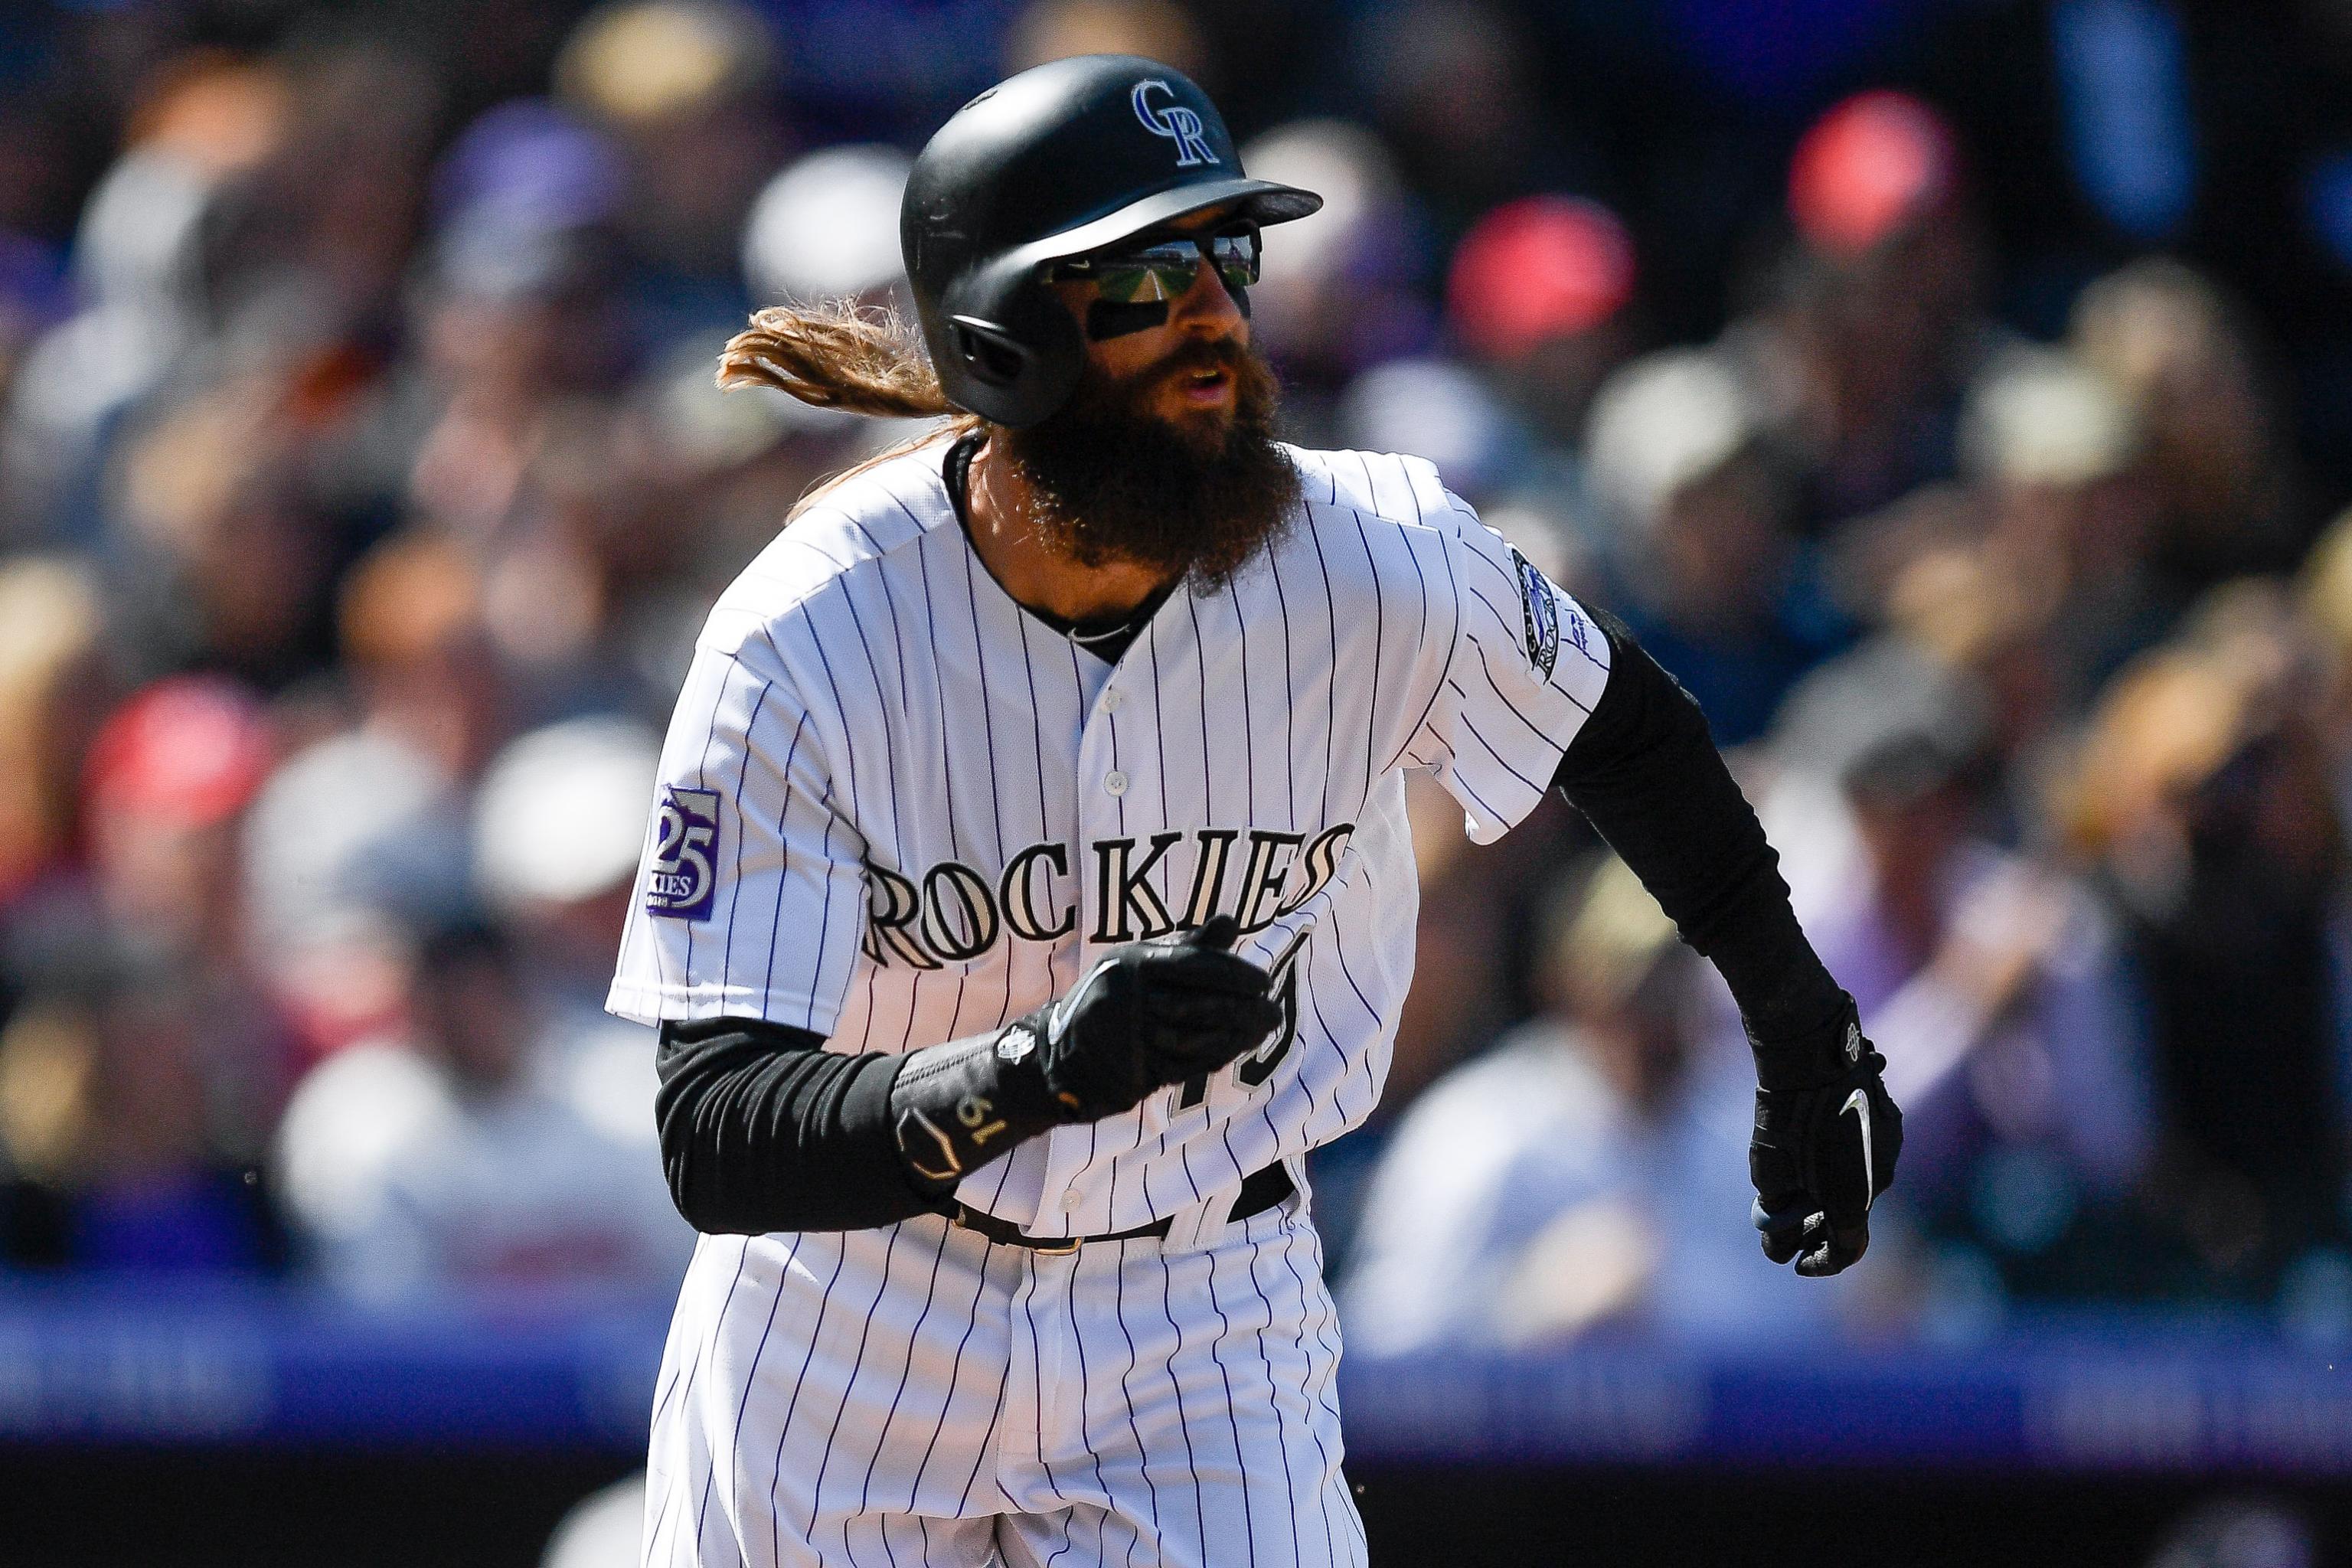 Charlie Blackmon's near cycle lets us in on why he just keeps